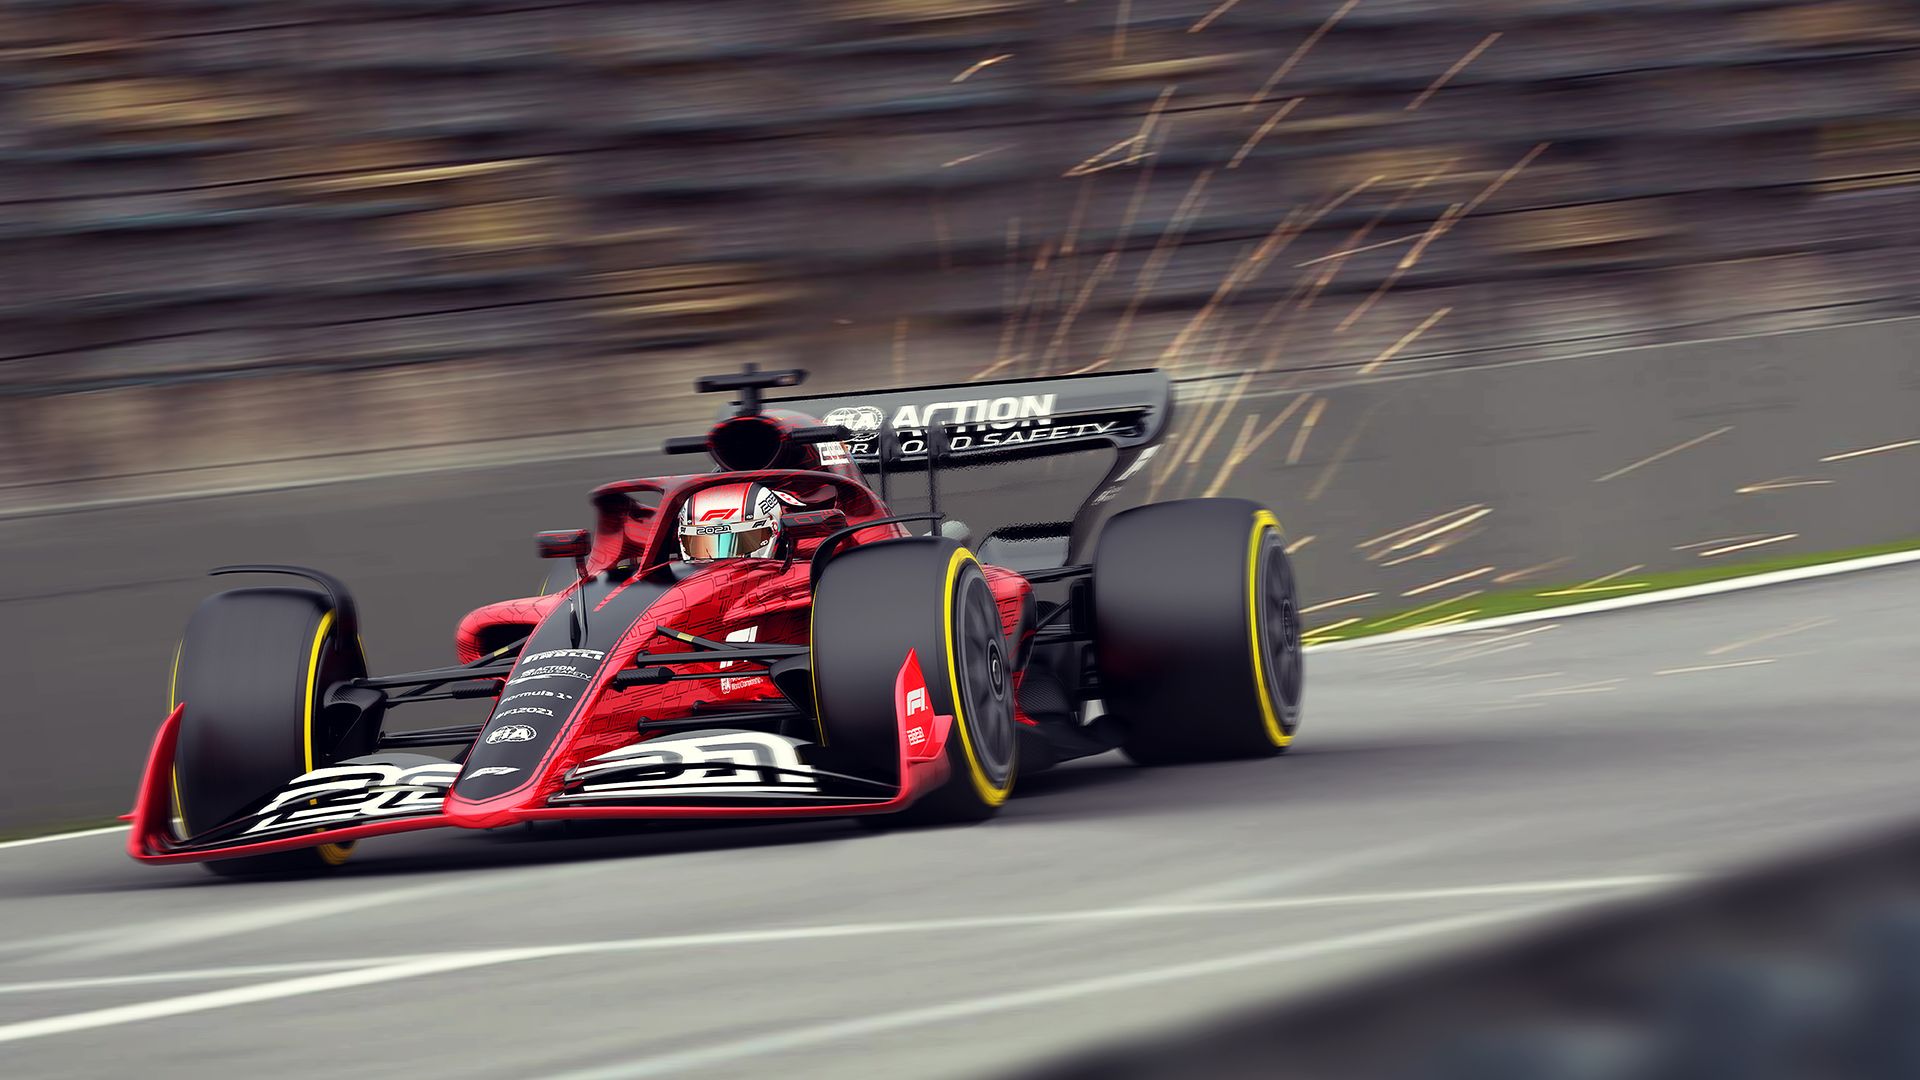 F1 2021 Game Wallpapers Wallpaper Cave